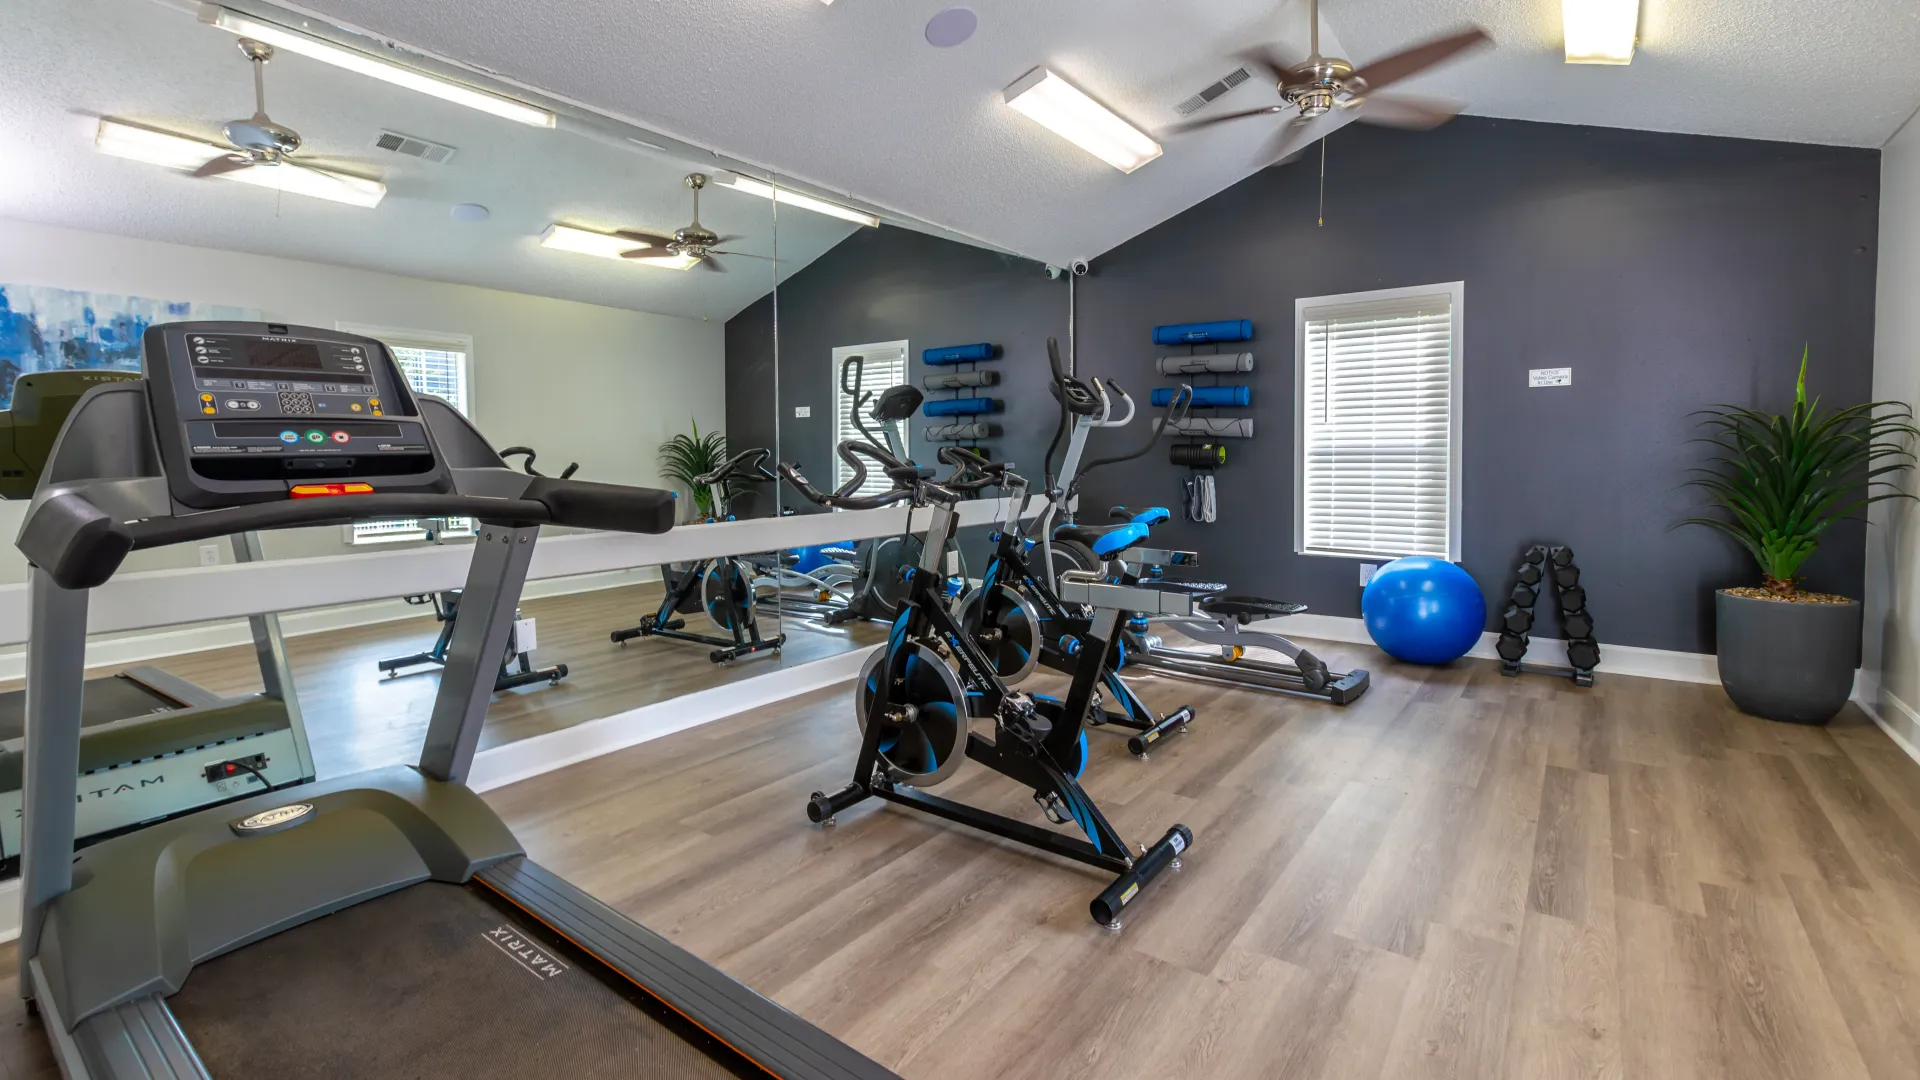 A resident gym with wall-to-wall exercise mirrors complete with a treadmill, spin bikes, hand weights and yoga gear with sleek wood-flooring for seamless moves.